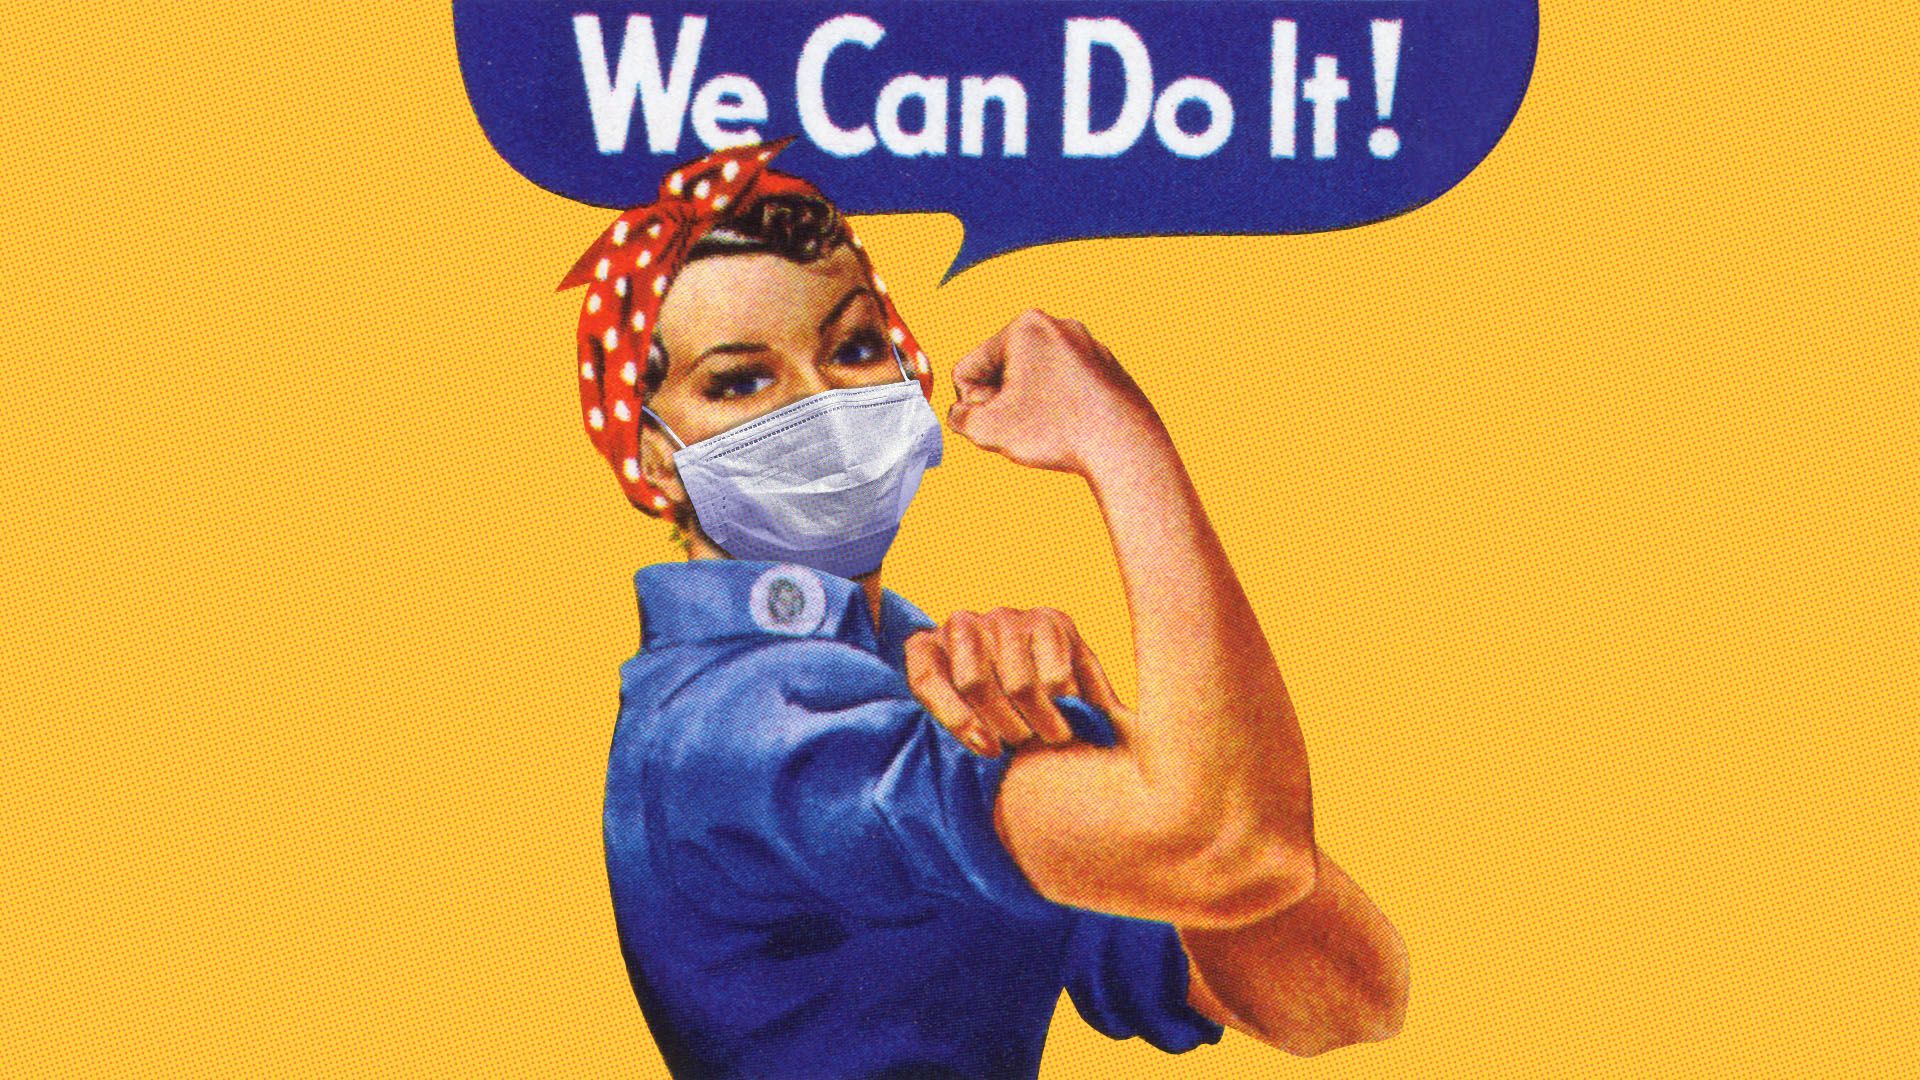 Illustration of the Rosie the Riveter poster wearing a medical mask.